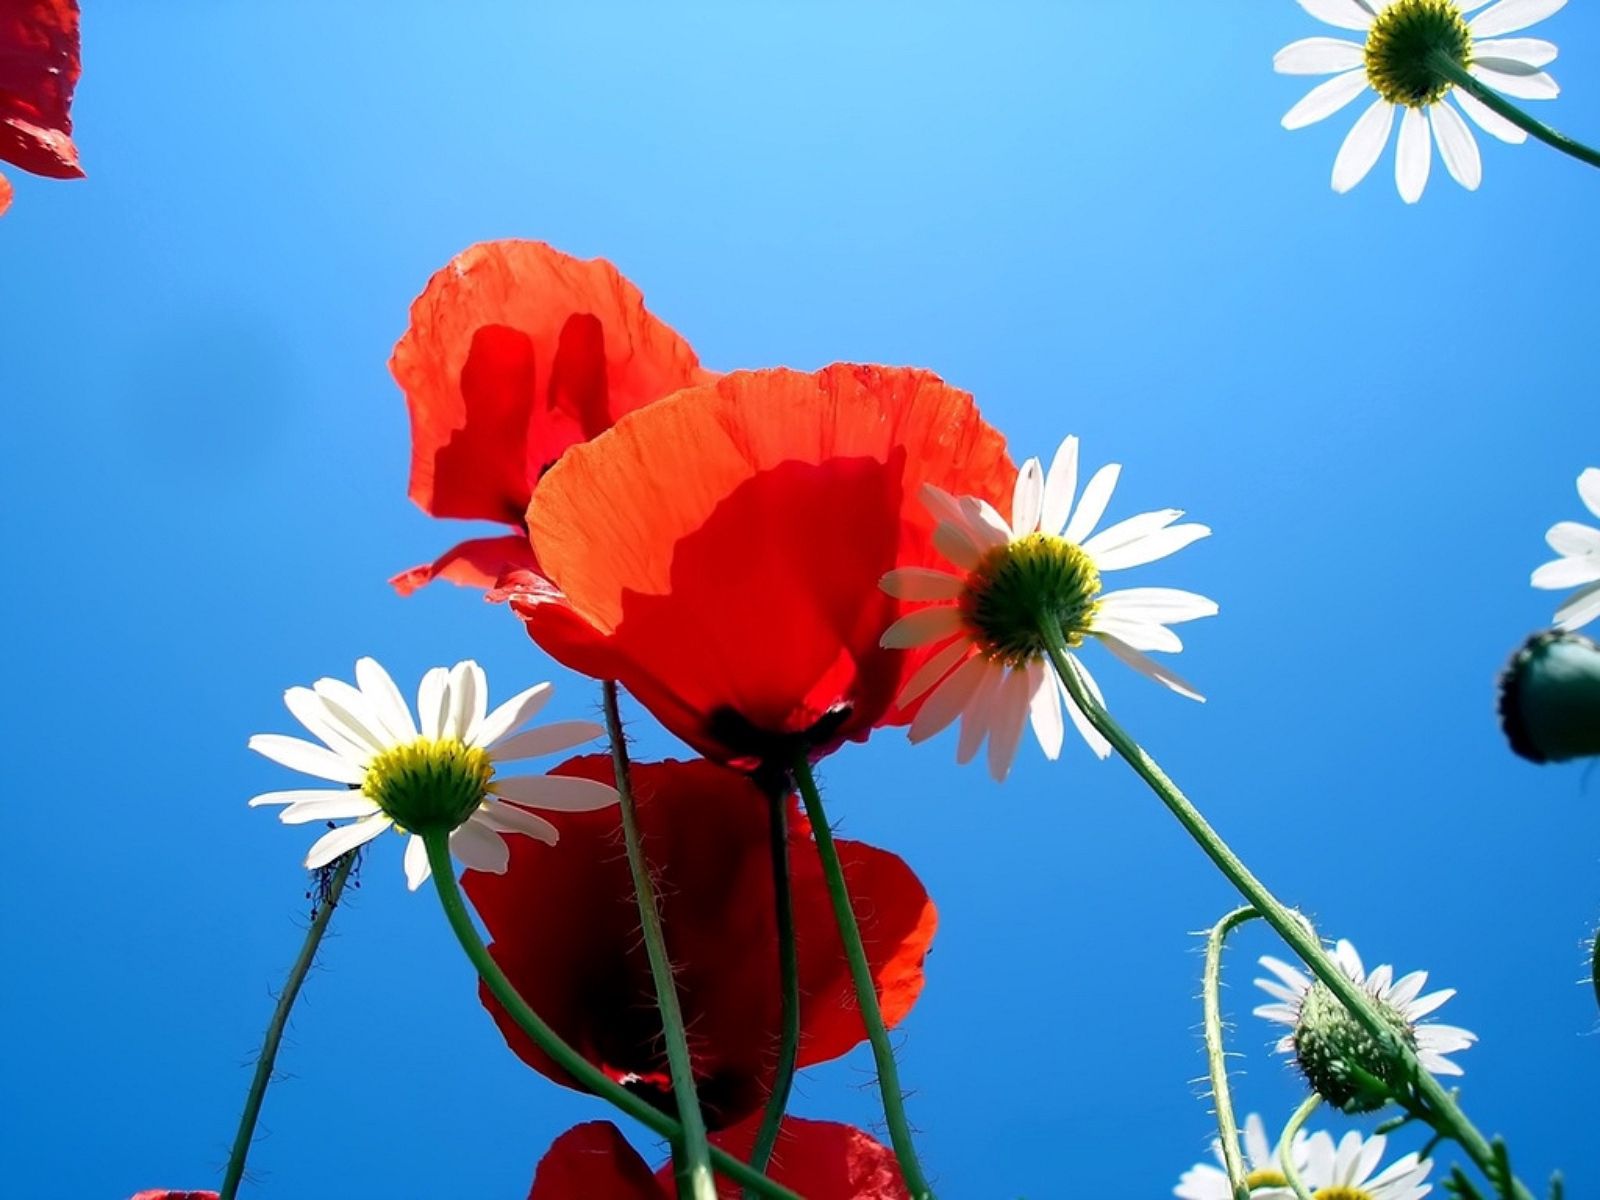 nature, flowers, sky, poppies, camomile, blue